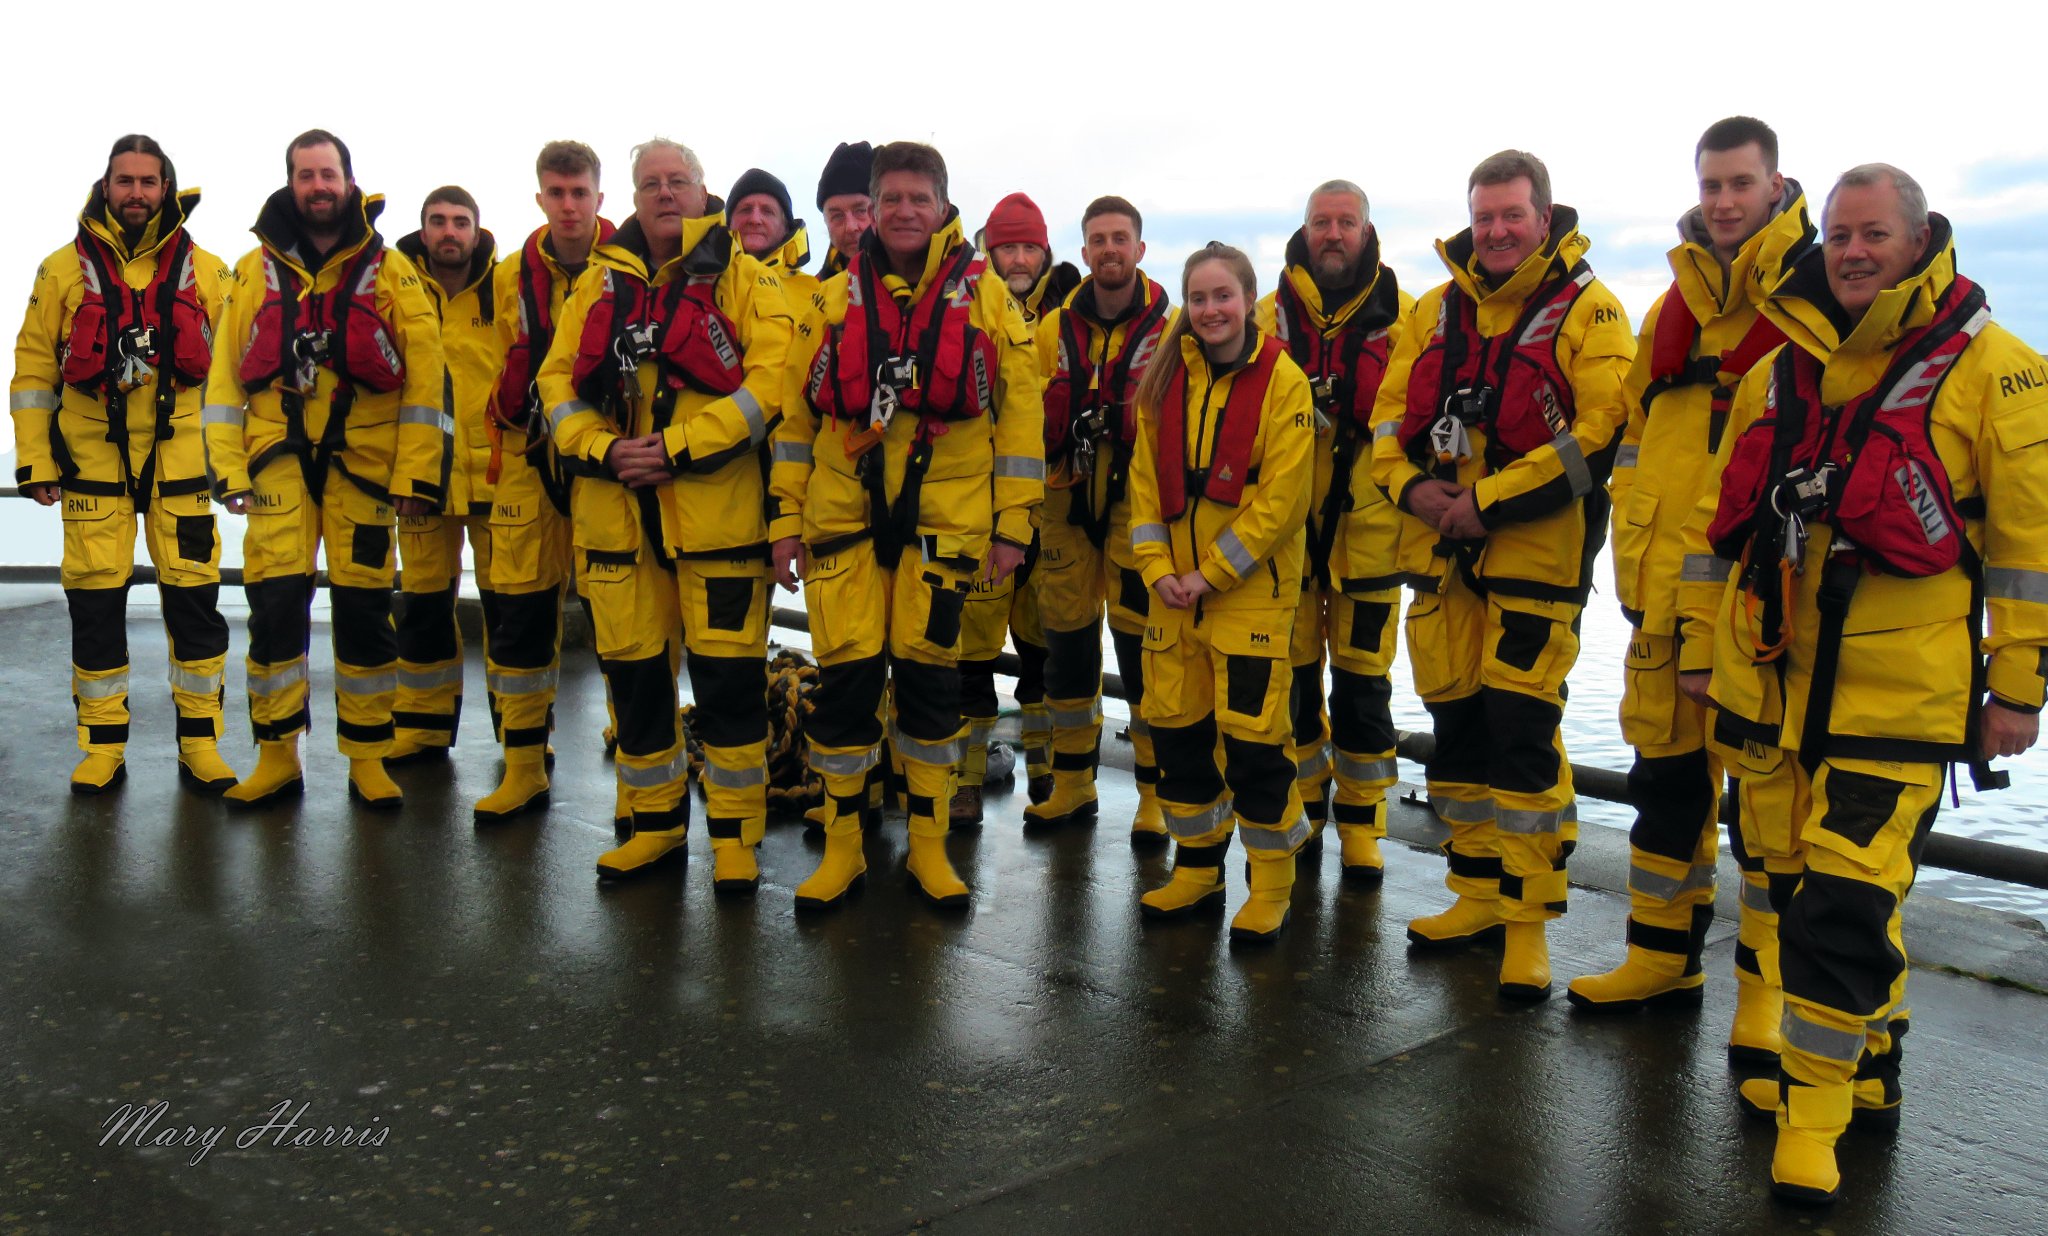 The current RNLI Longhope Lifeboat crew - image by Mary Harris